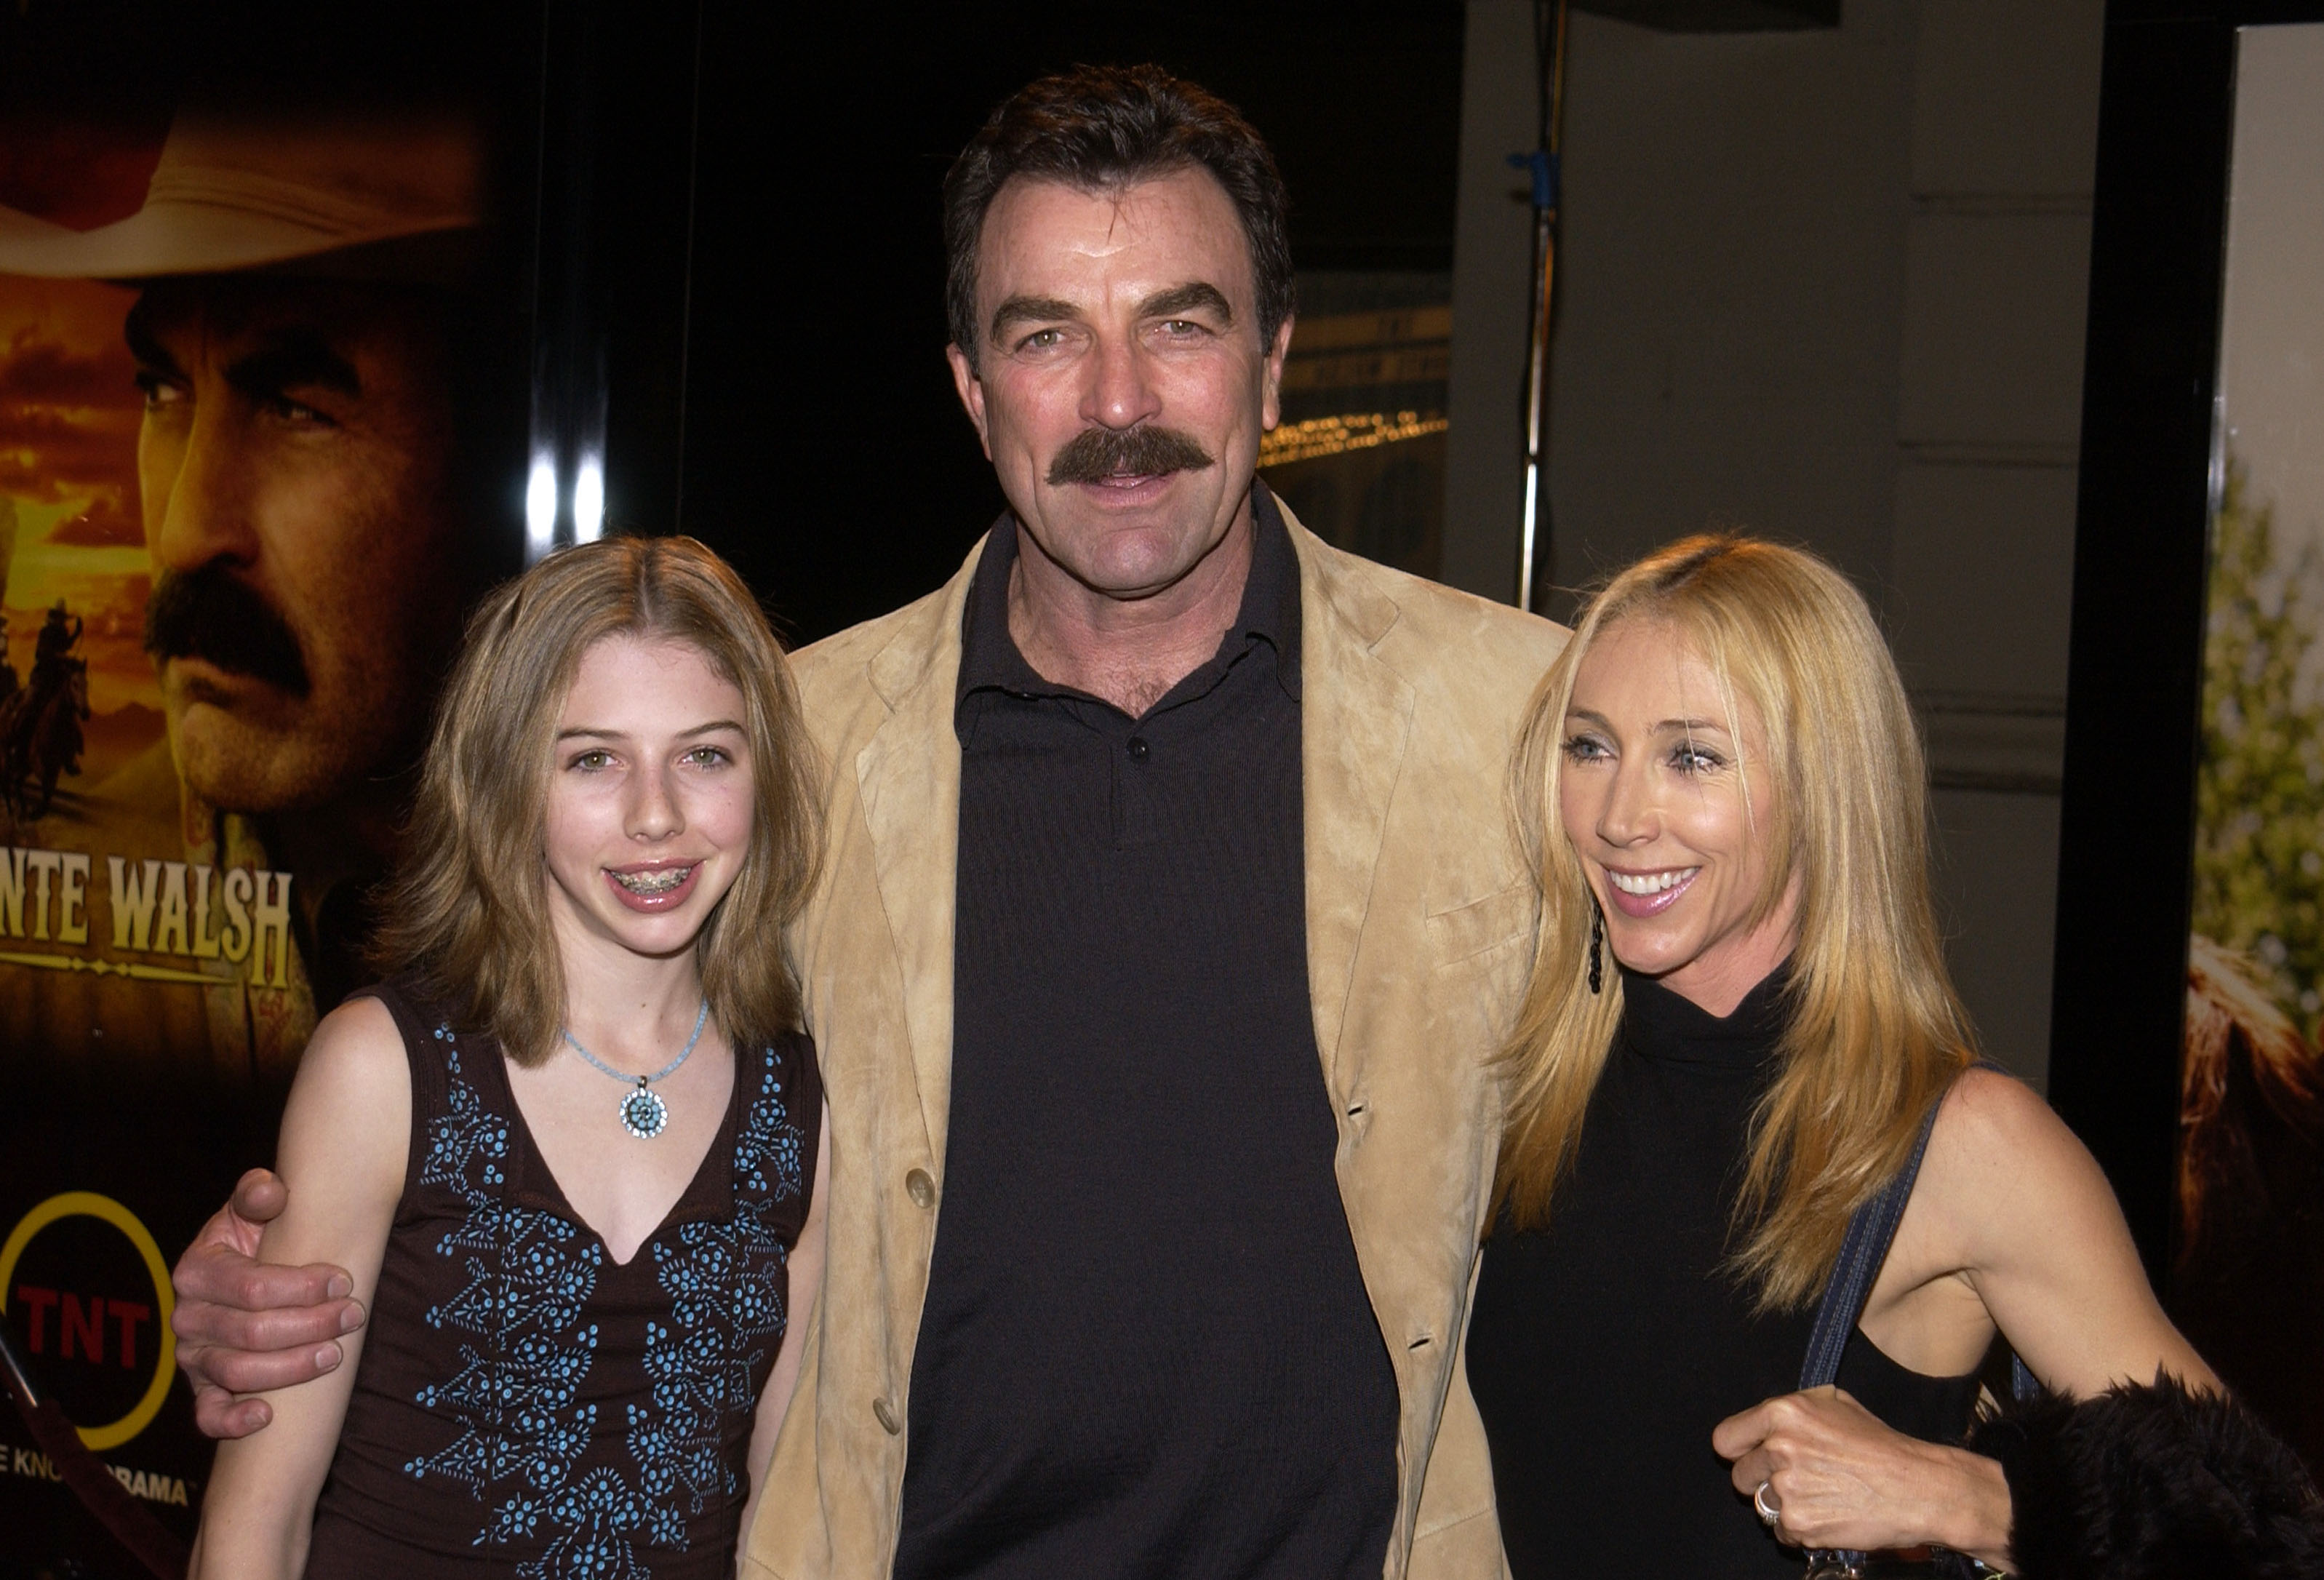 Hannah Selleck, Tom Selleck, and Jillie Mack at the Los Angeles premiere of "Monte Walsh," 2003 | Source: Getty Images